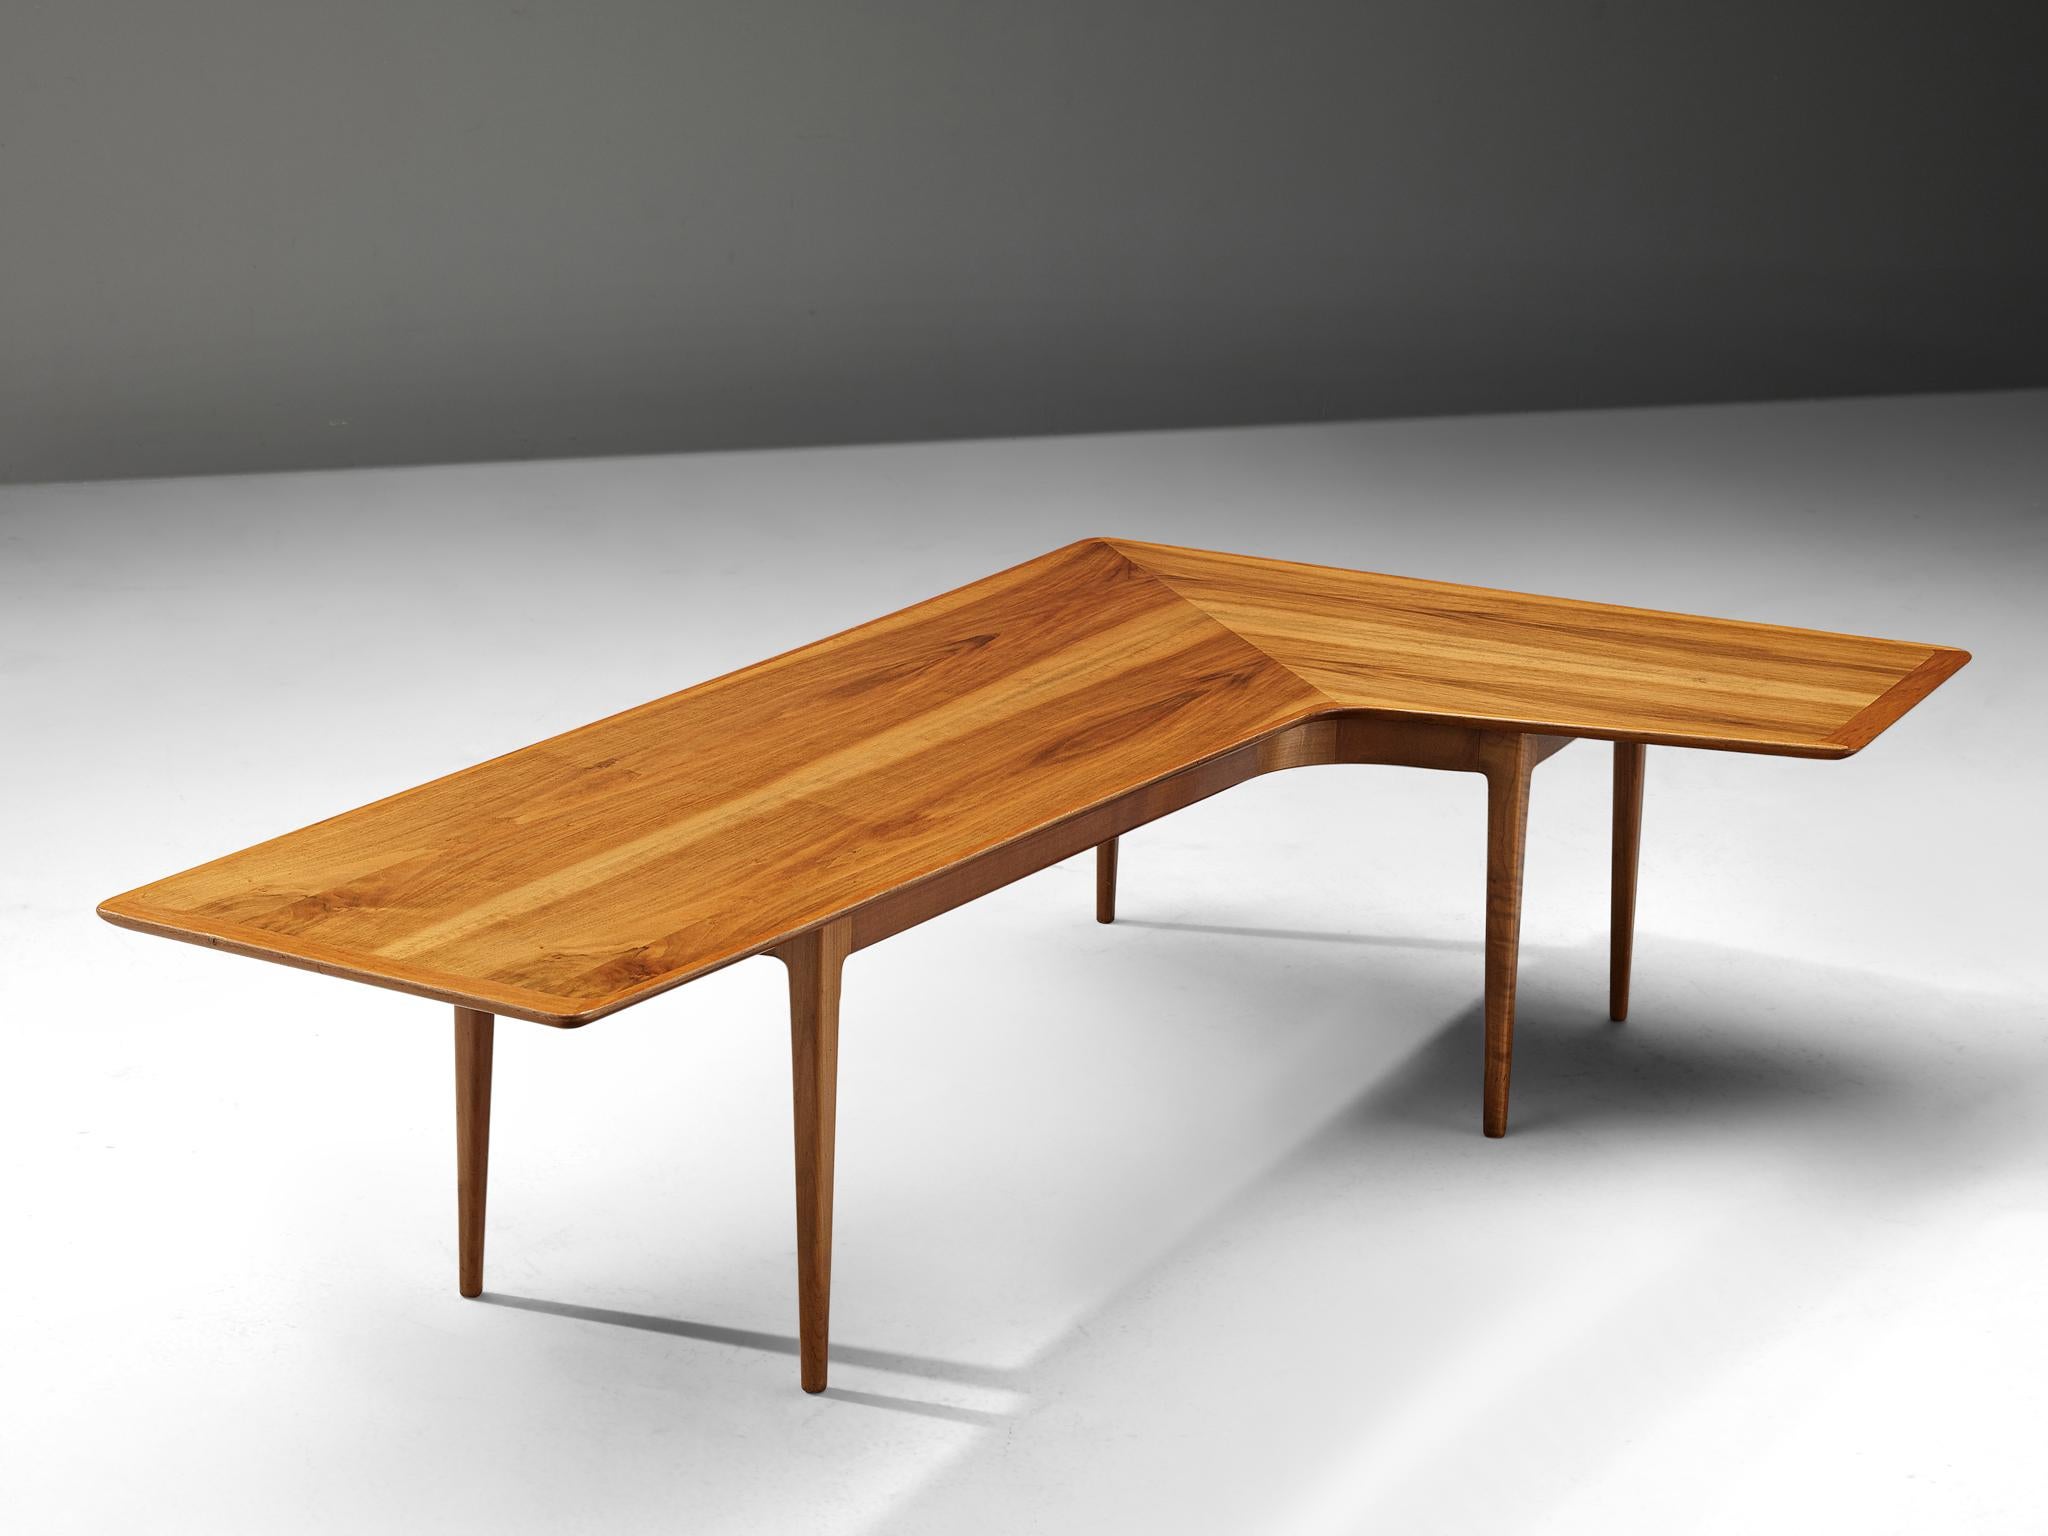 Coffee table, pine, Denmark, 1960s

This angular table is executed with squared tapered legs and a boomerang-shaped top in pine. The table top shows a beautiful subtle wood grain that gets more capricious where the angled wood pieces meet. 
A